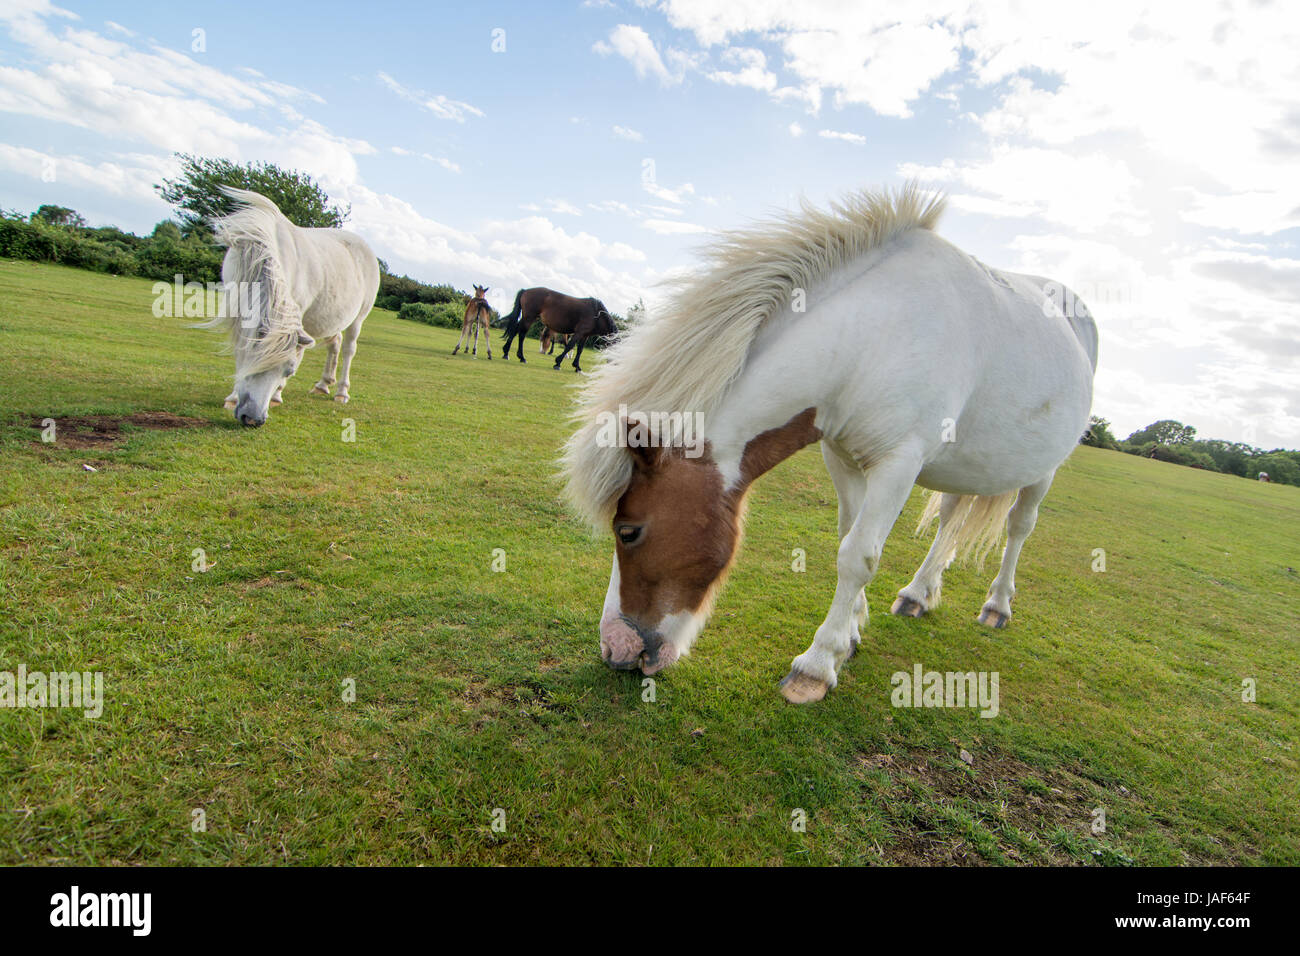 Bad hair day in windy weather for New Forest National Park white Shetland pony, Hampshire. Stock Photo